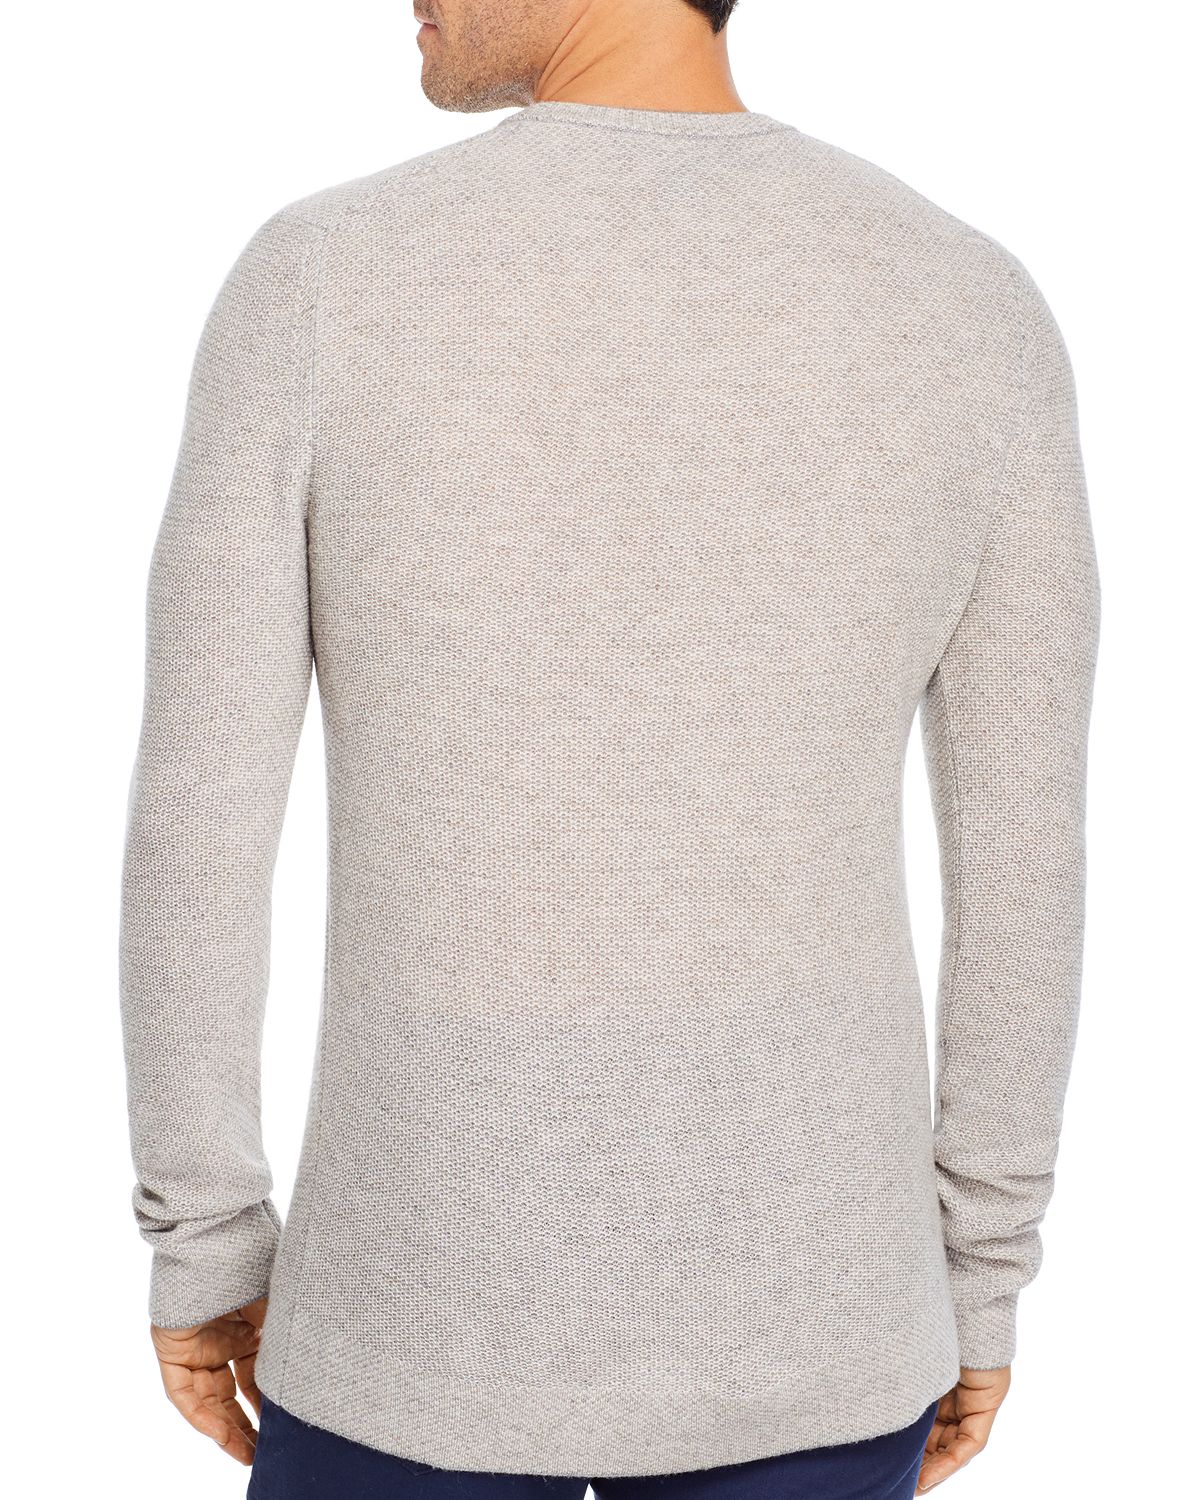 The Men's Store Wool & Cashmere Honeycomb Sweater Gray/Navy